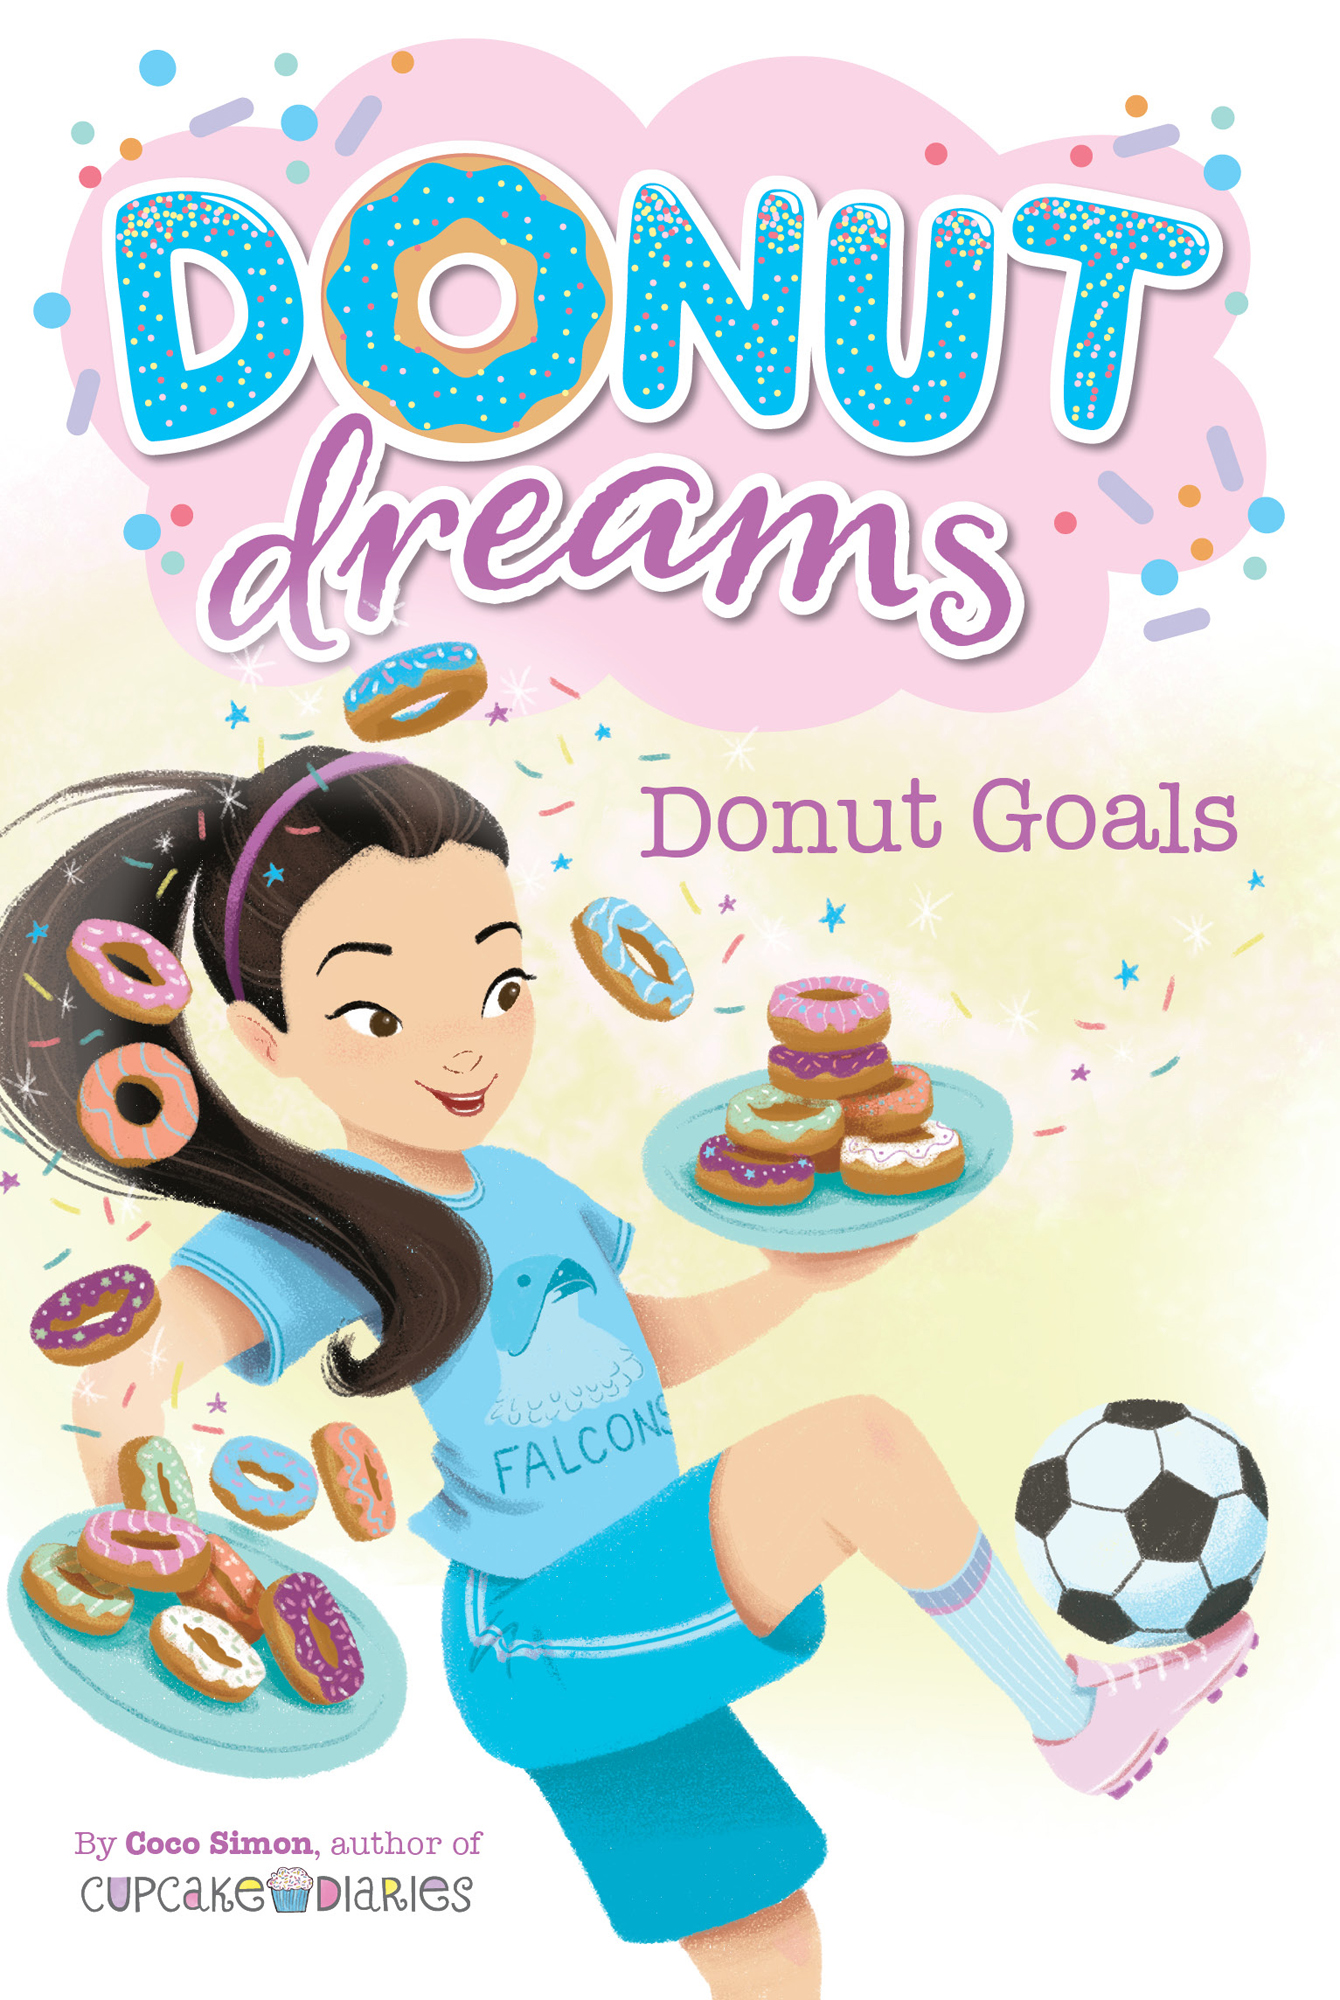 Donut dreams Donut Goals By Coco Simon author of Cupcake Diaries This book - photo 1